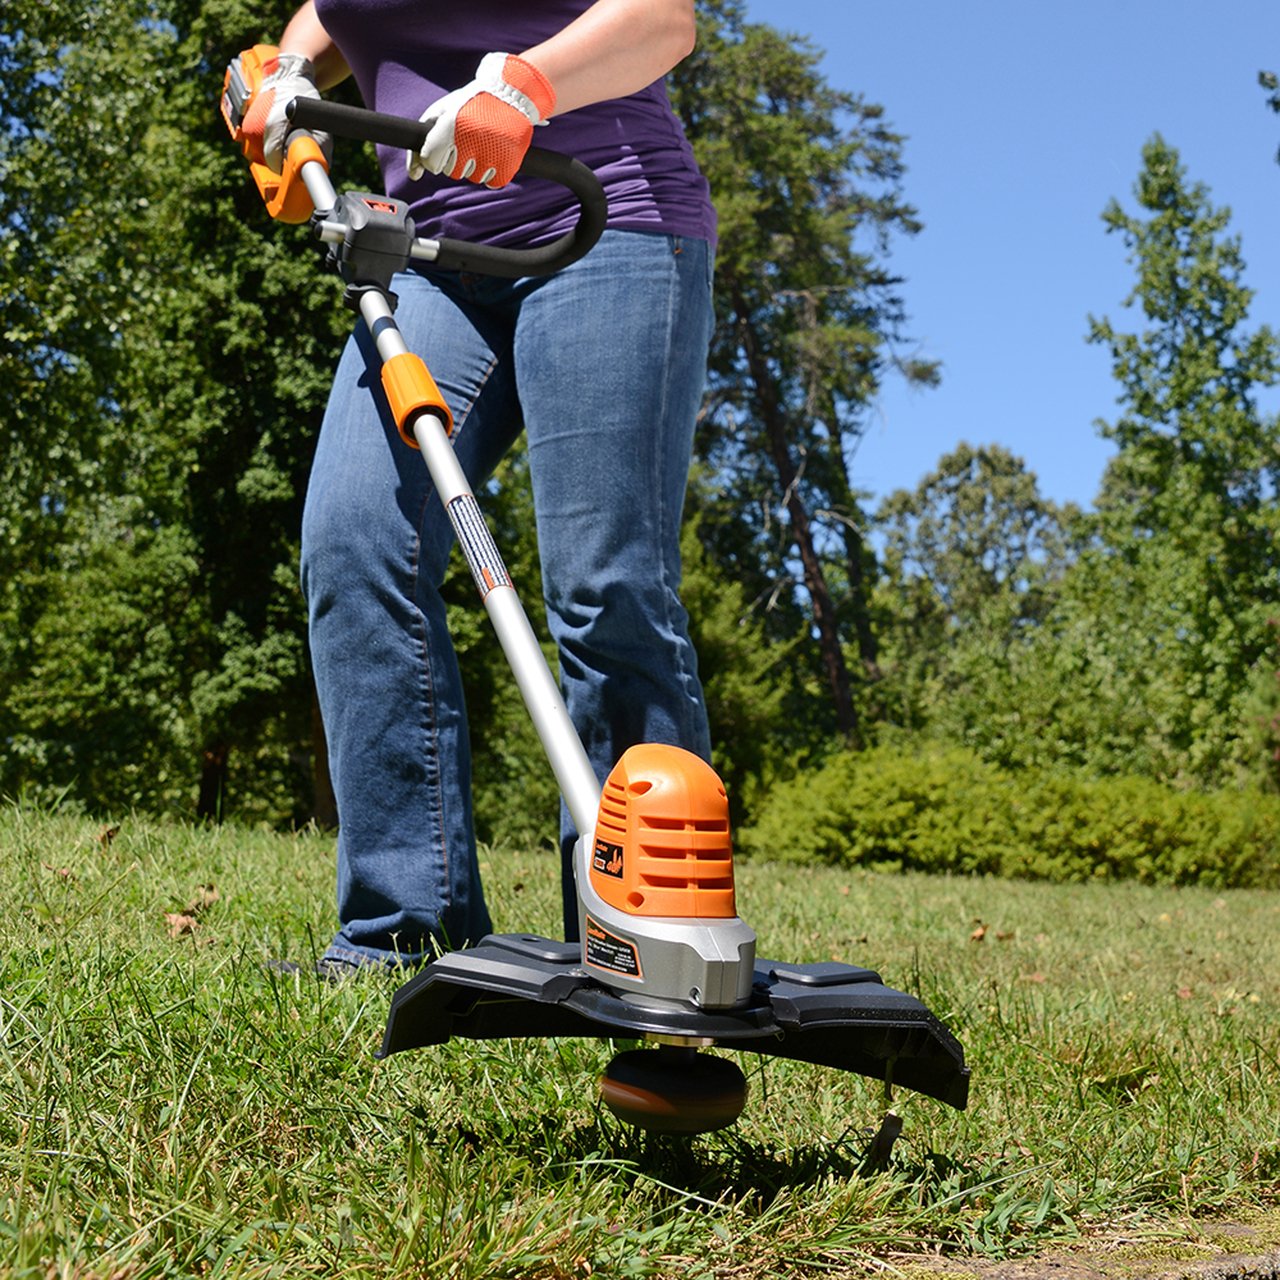 What Is The Best Lawn Trimmer To Buy